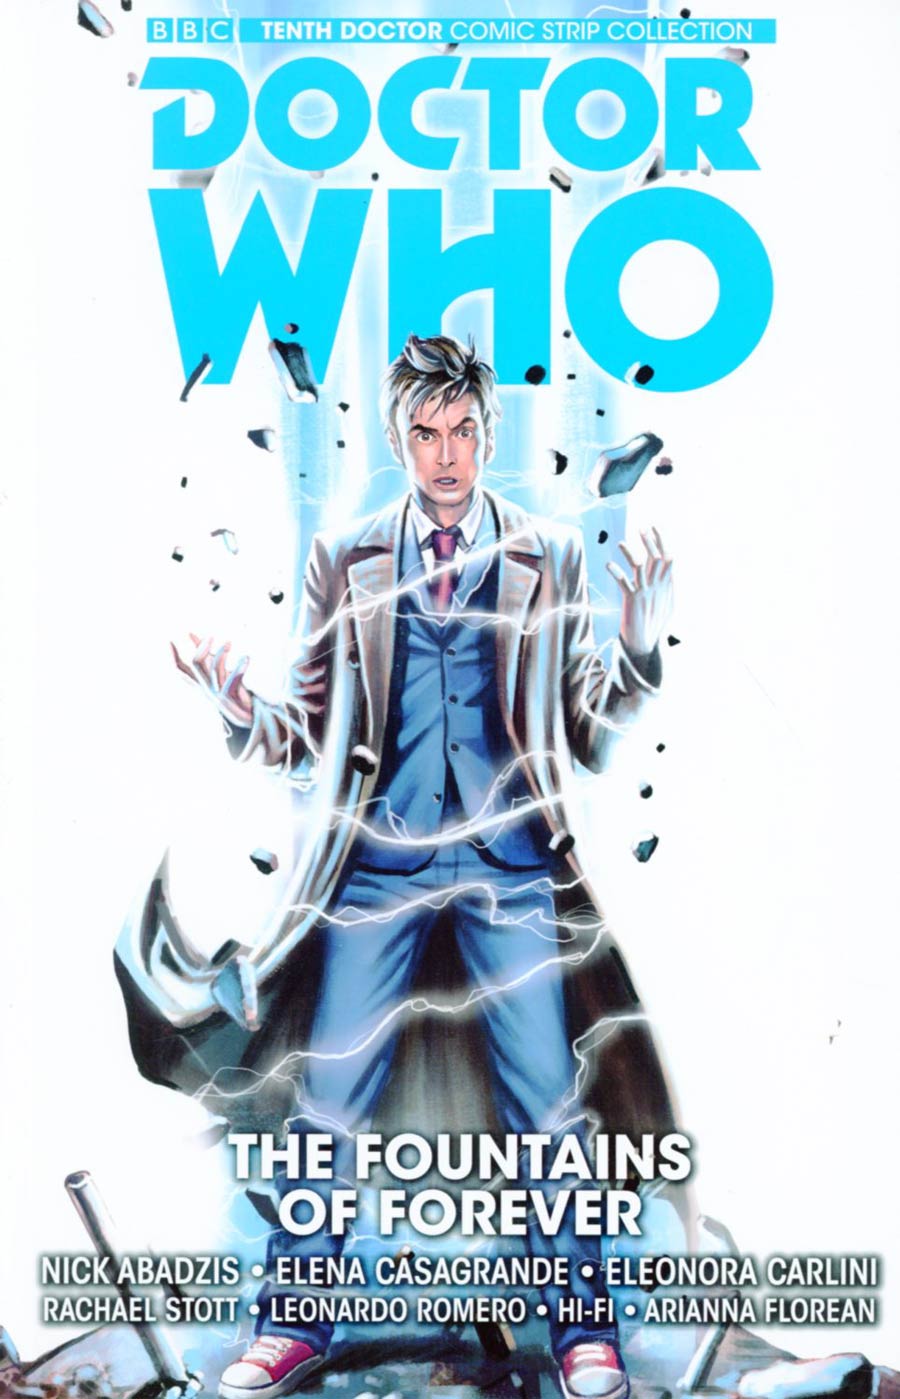 Doctor Who 10th Doctor Vol 3 Fountains Of Forever TP